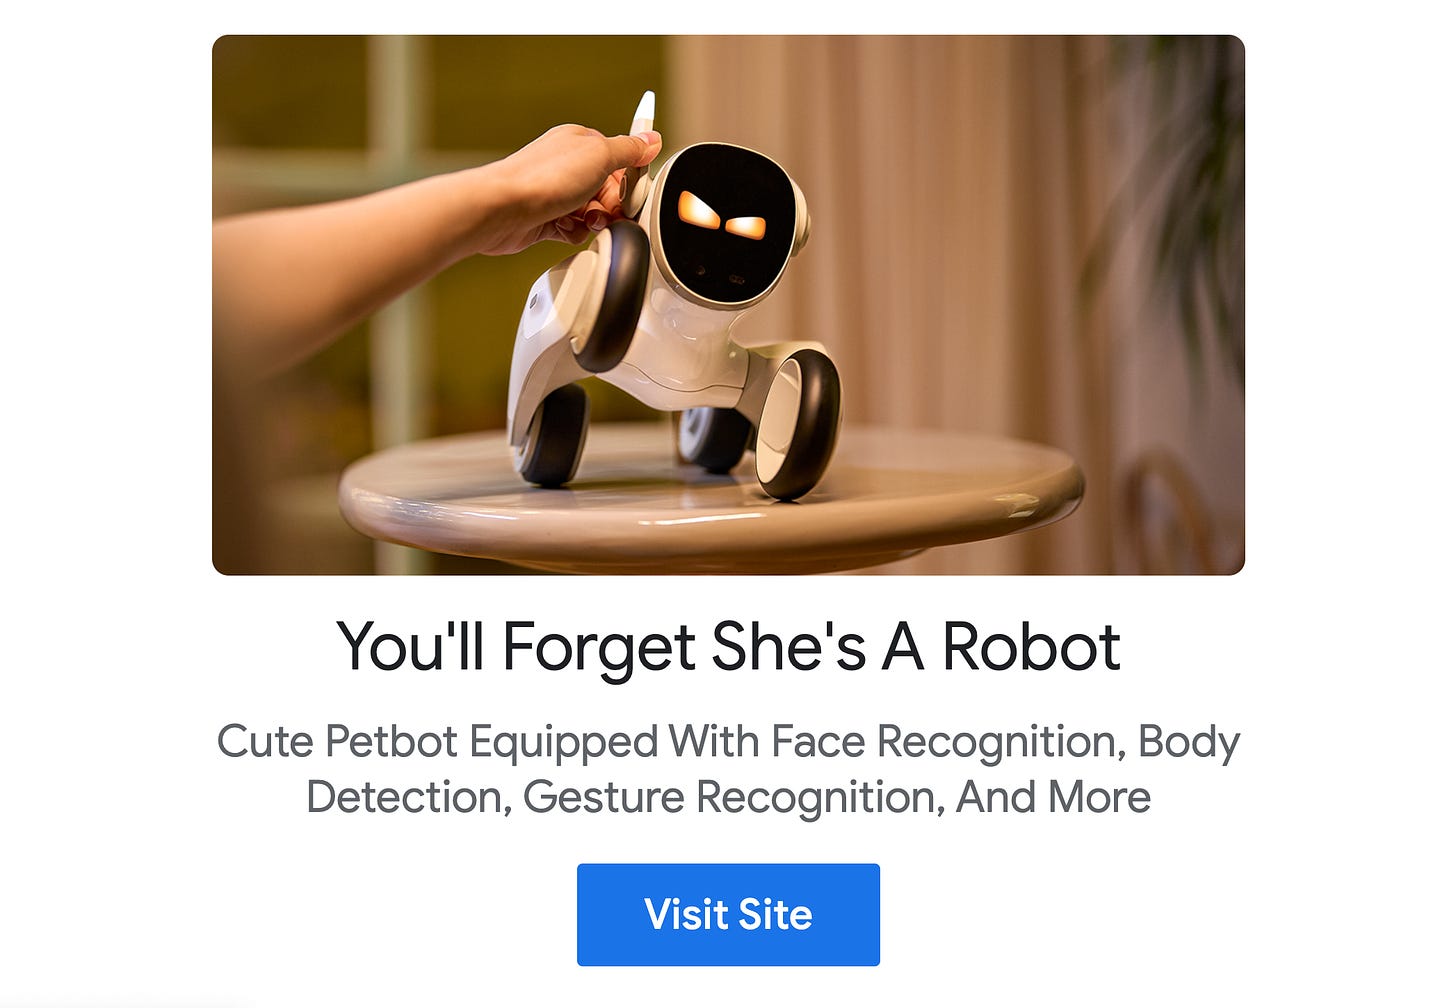 You'll forget she's a robot. Menacing dog-like robot stares back at you.